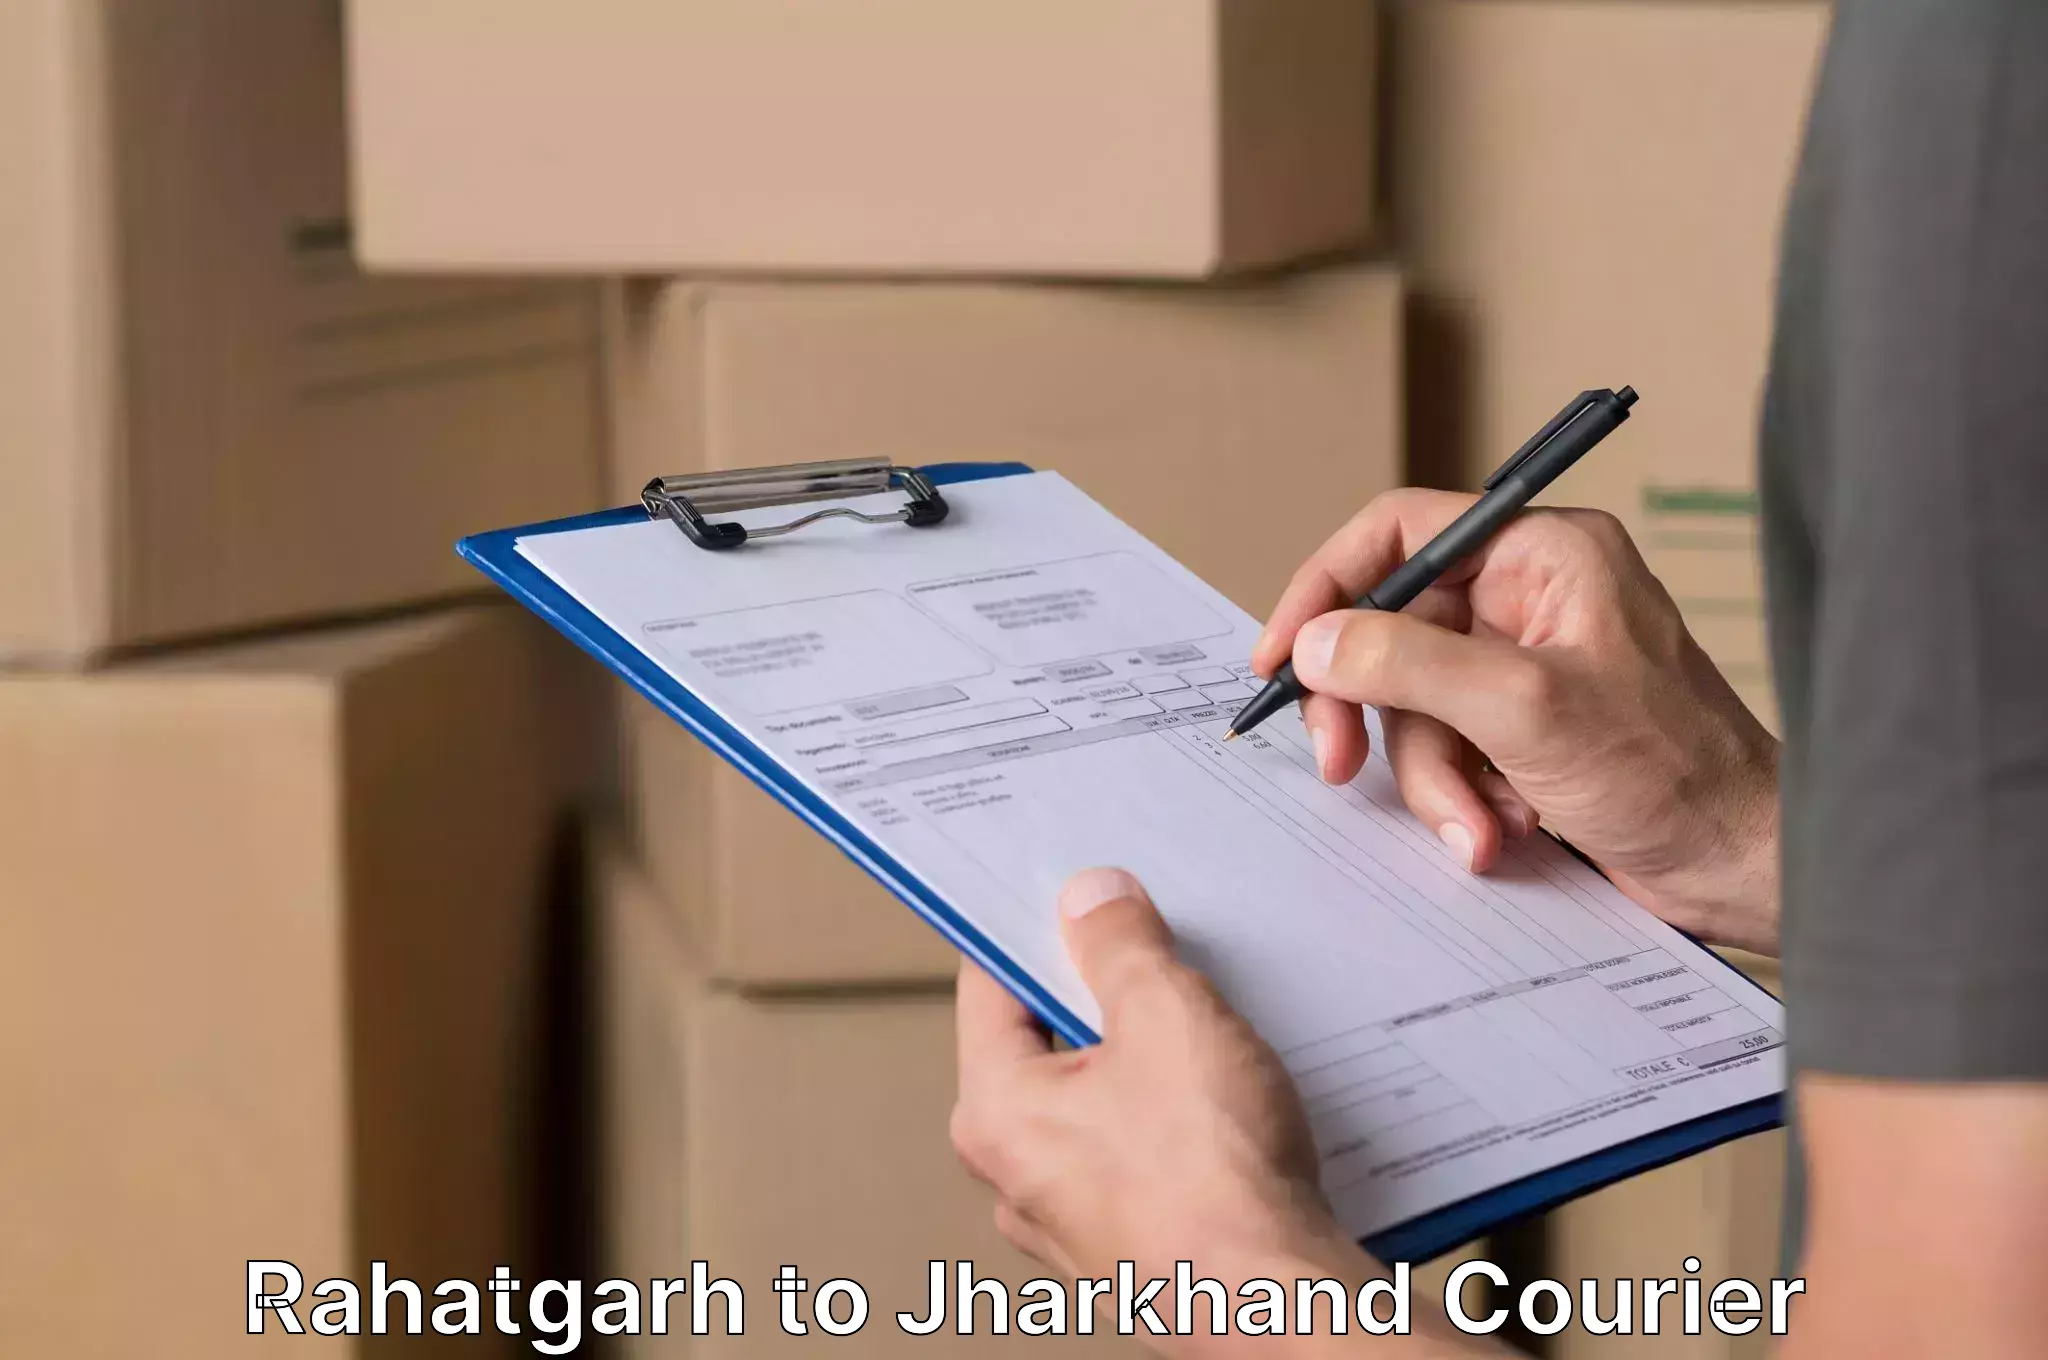 Tailored relocation services Rahatgarh to Jamshedpur